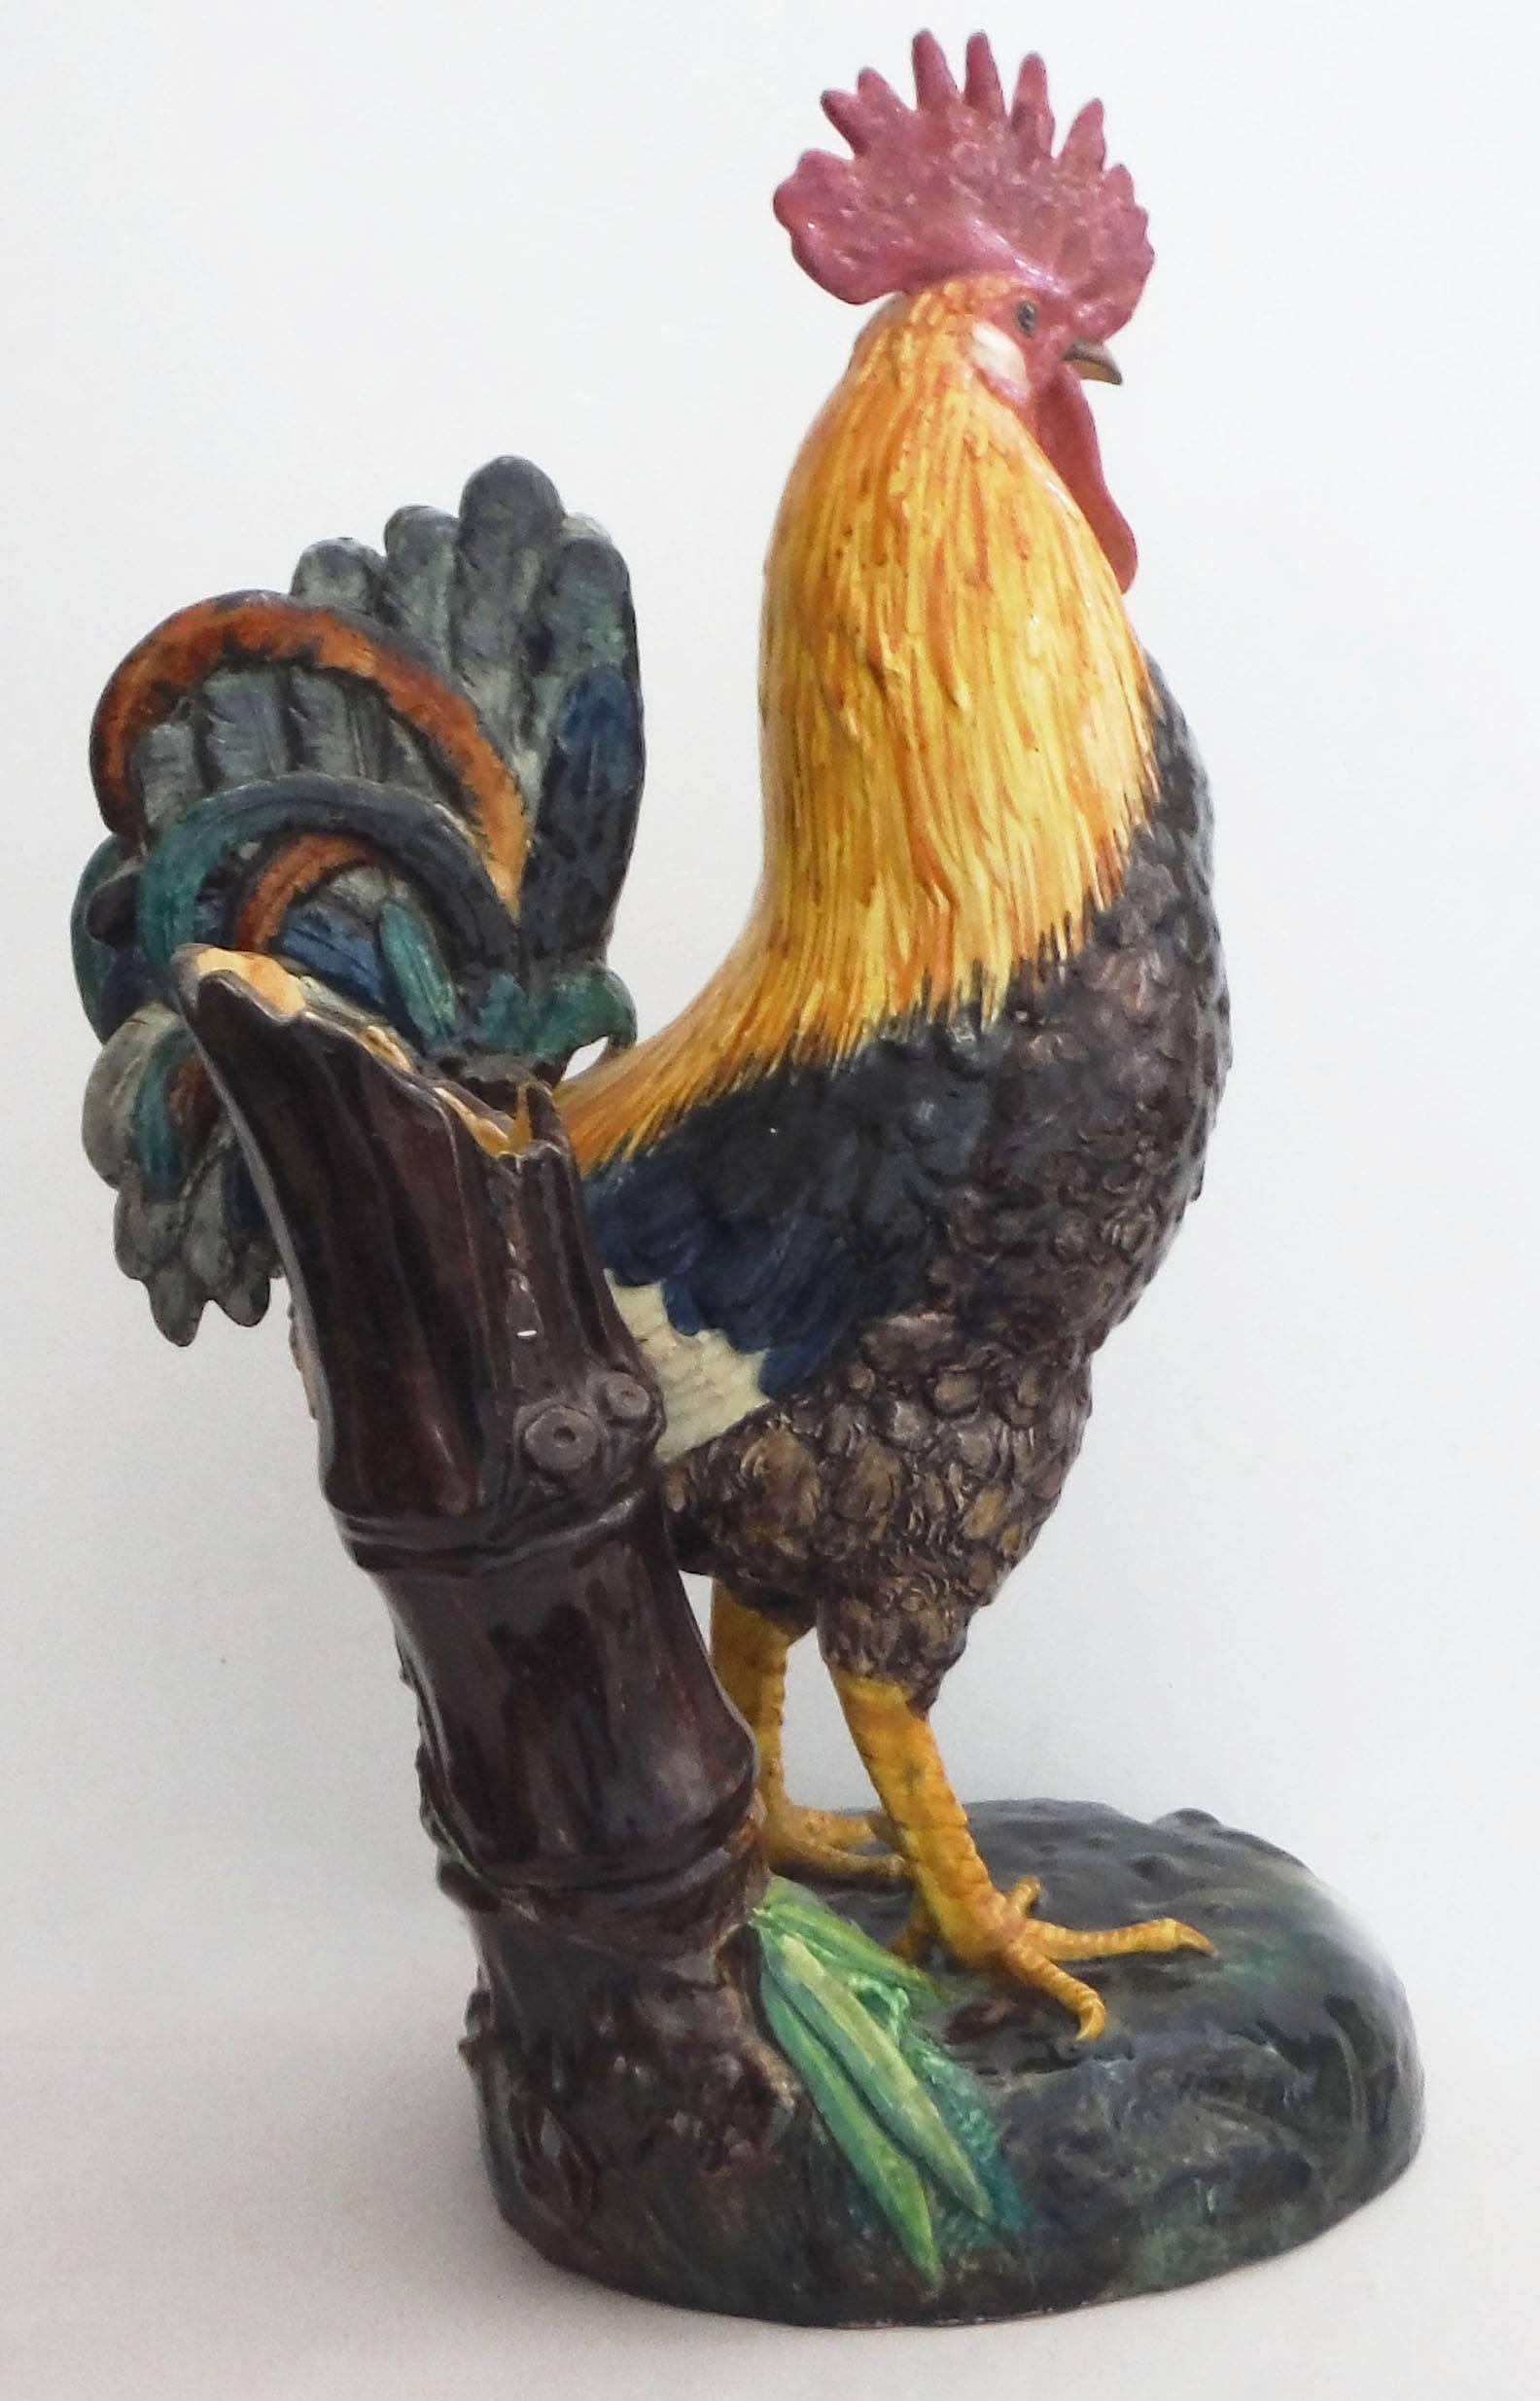 Large Majolica colorful rooster signed Delphin Massier circa 1890.
On the back of the rooster, a rare brown bamboo vase, usually the vase is a trunk.